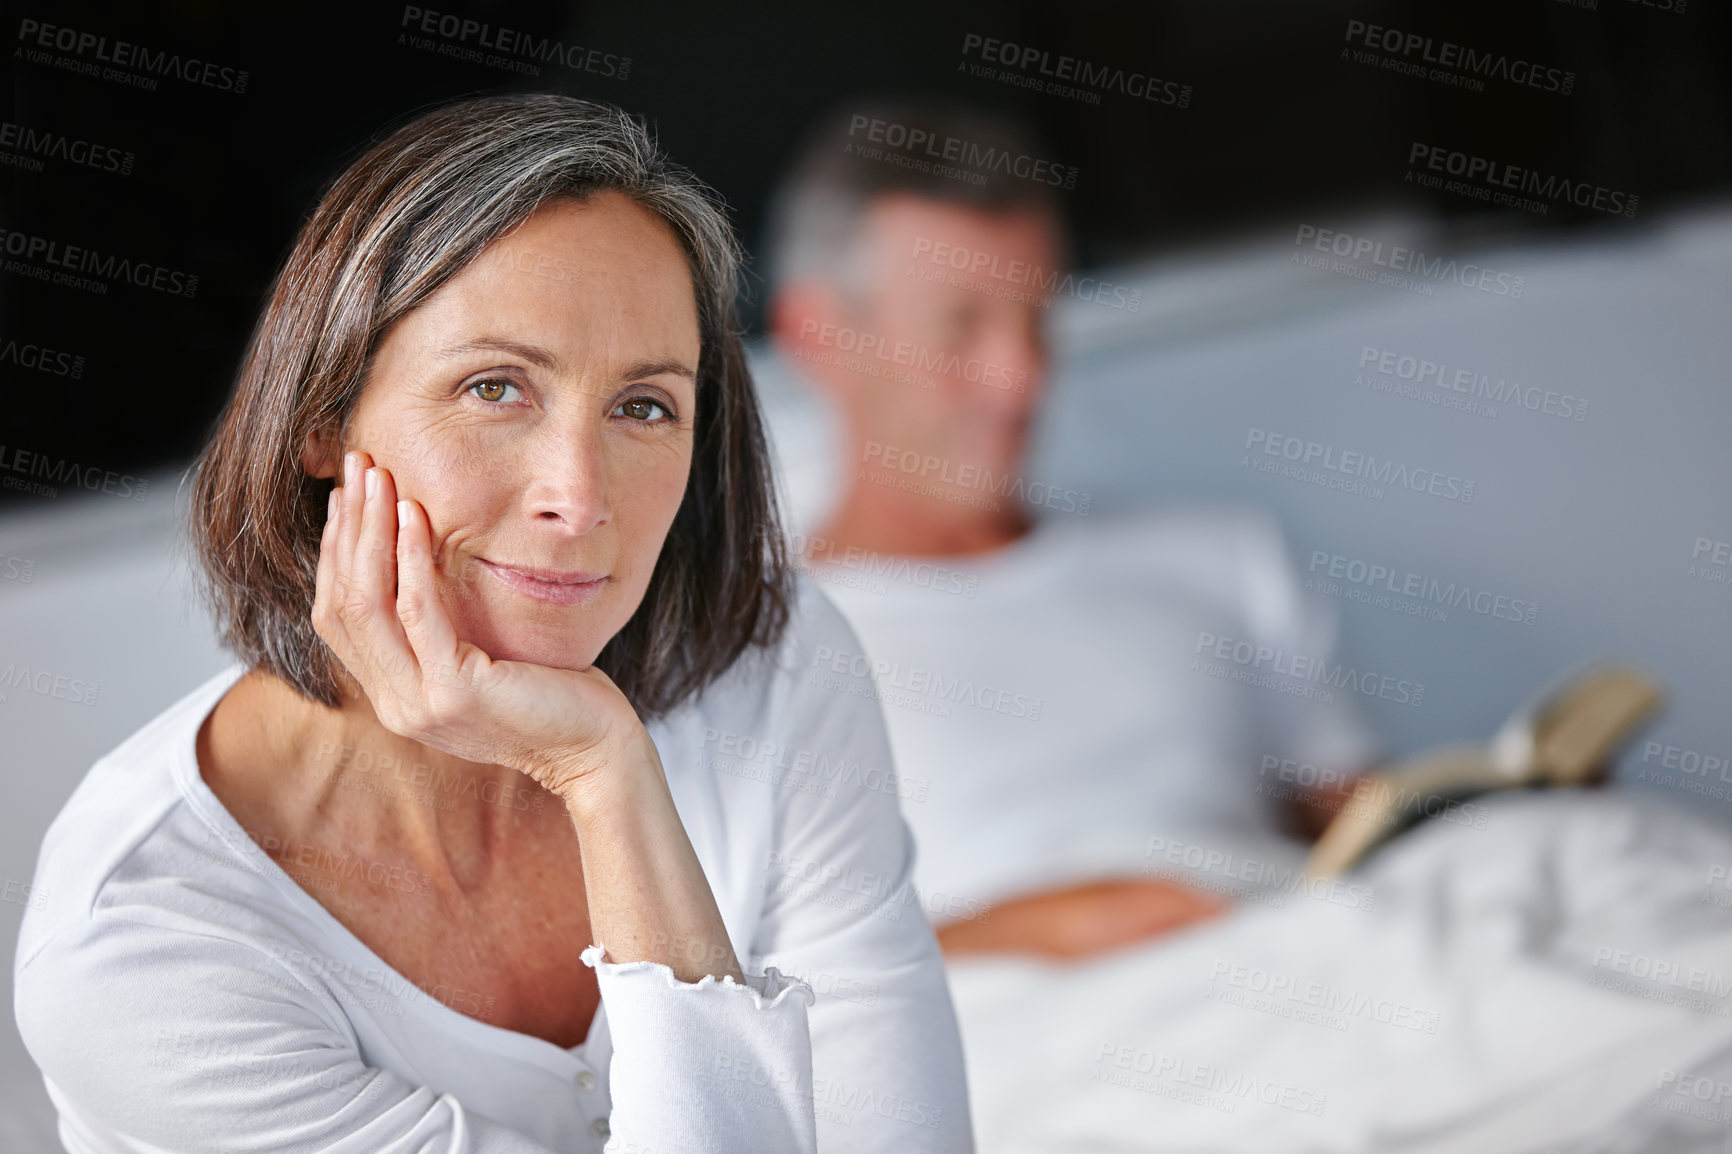 Buy stock photo Portrait of an attractive mature woman sitting on her bed with her husband in the background